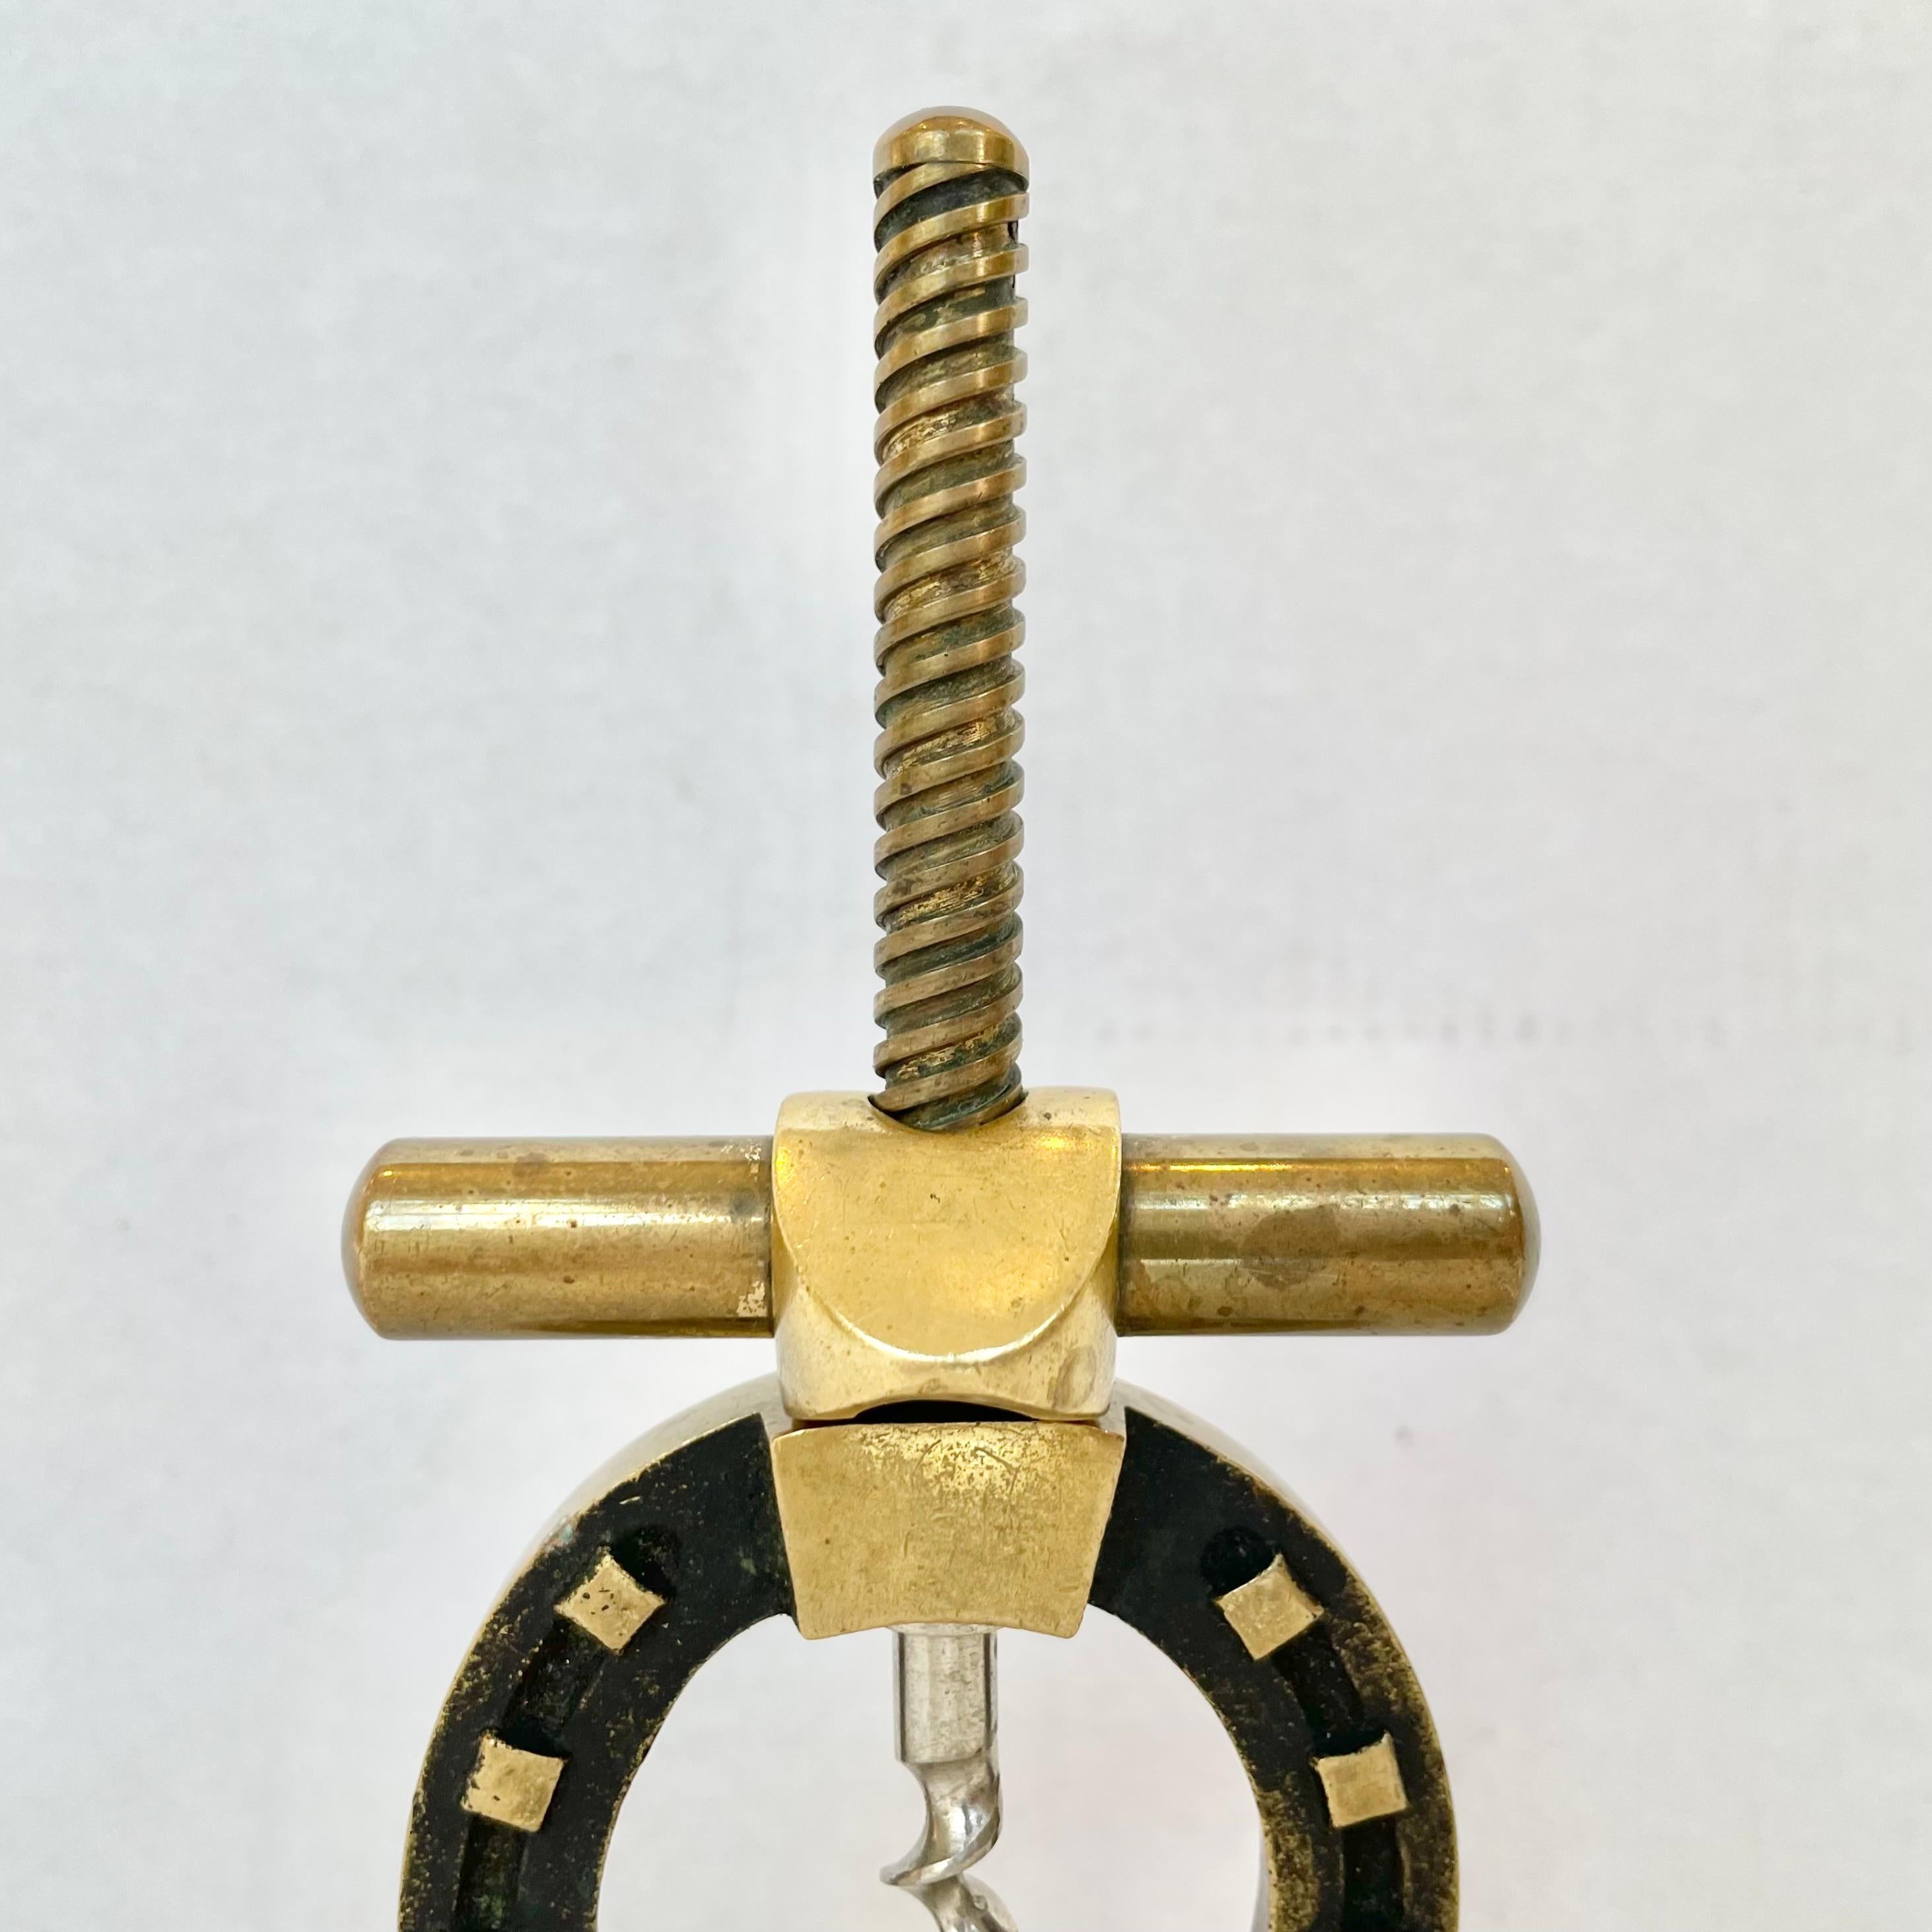 Brass bottle opener in the style of Jaques Adnet. Large screw runs the length of the corkscrew with a heavy brass grip and a sharp steel tip. With a beautiful and elegant design resembling a horseshoe, this piece is heavy and very solid. Stands up